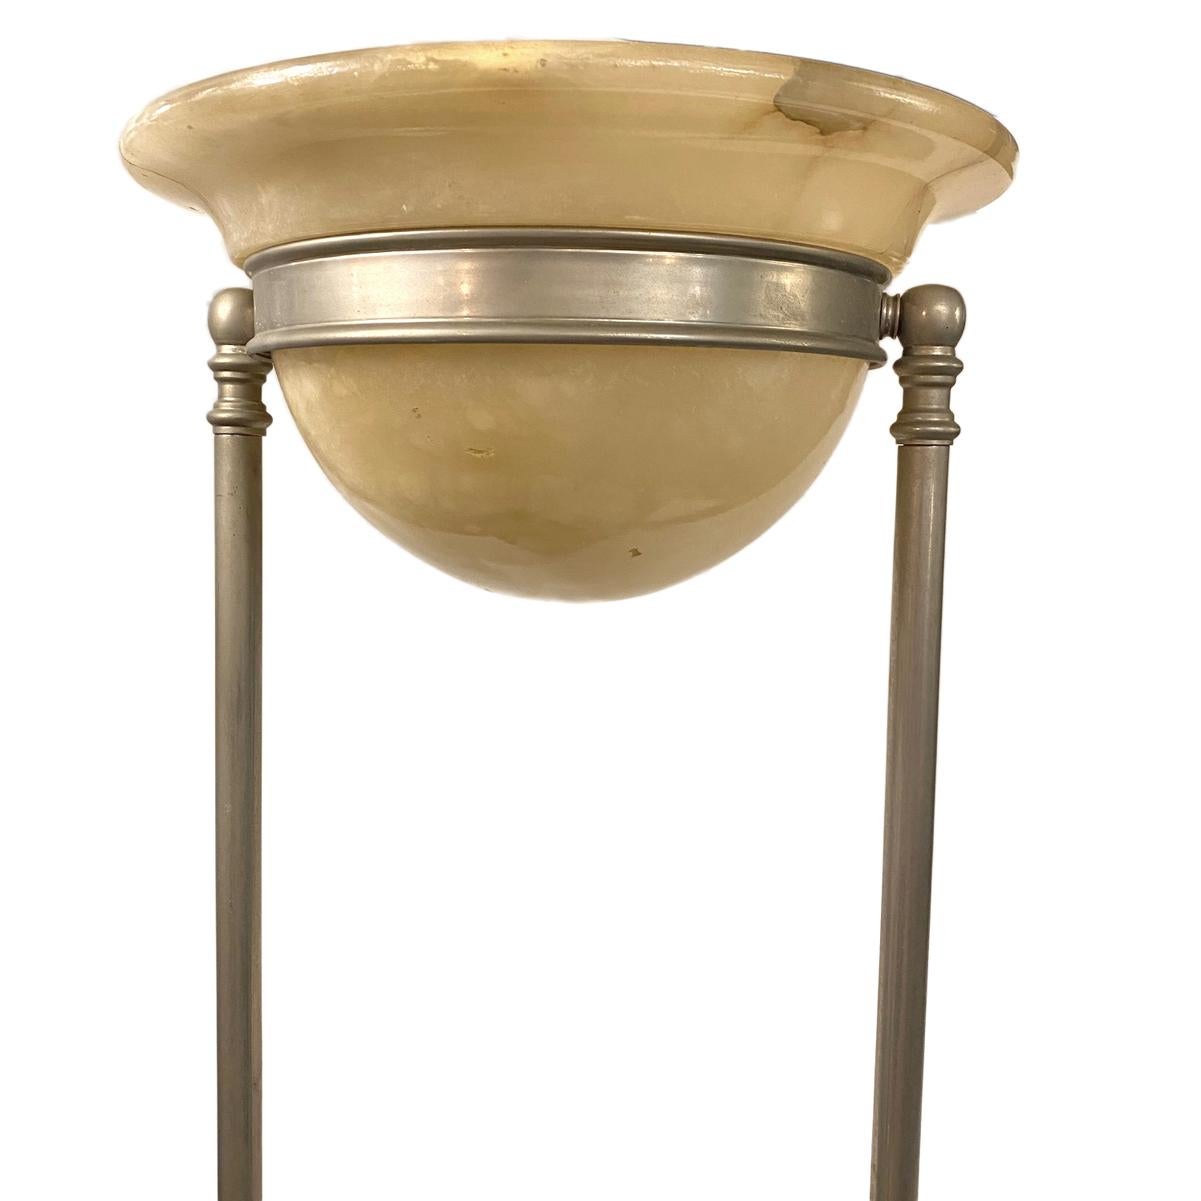 A circa 1950s Italian silver plated floor lamp with a swiveling alabaster bowl top.

Measurements:
Height 70.25